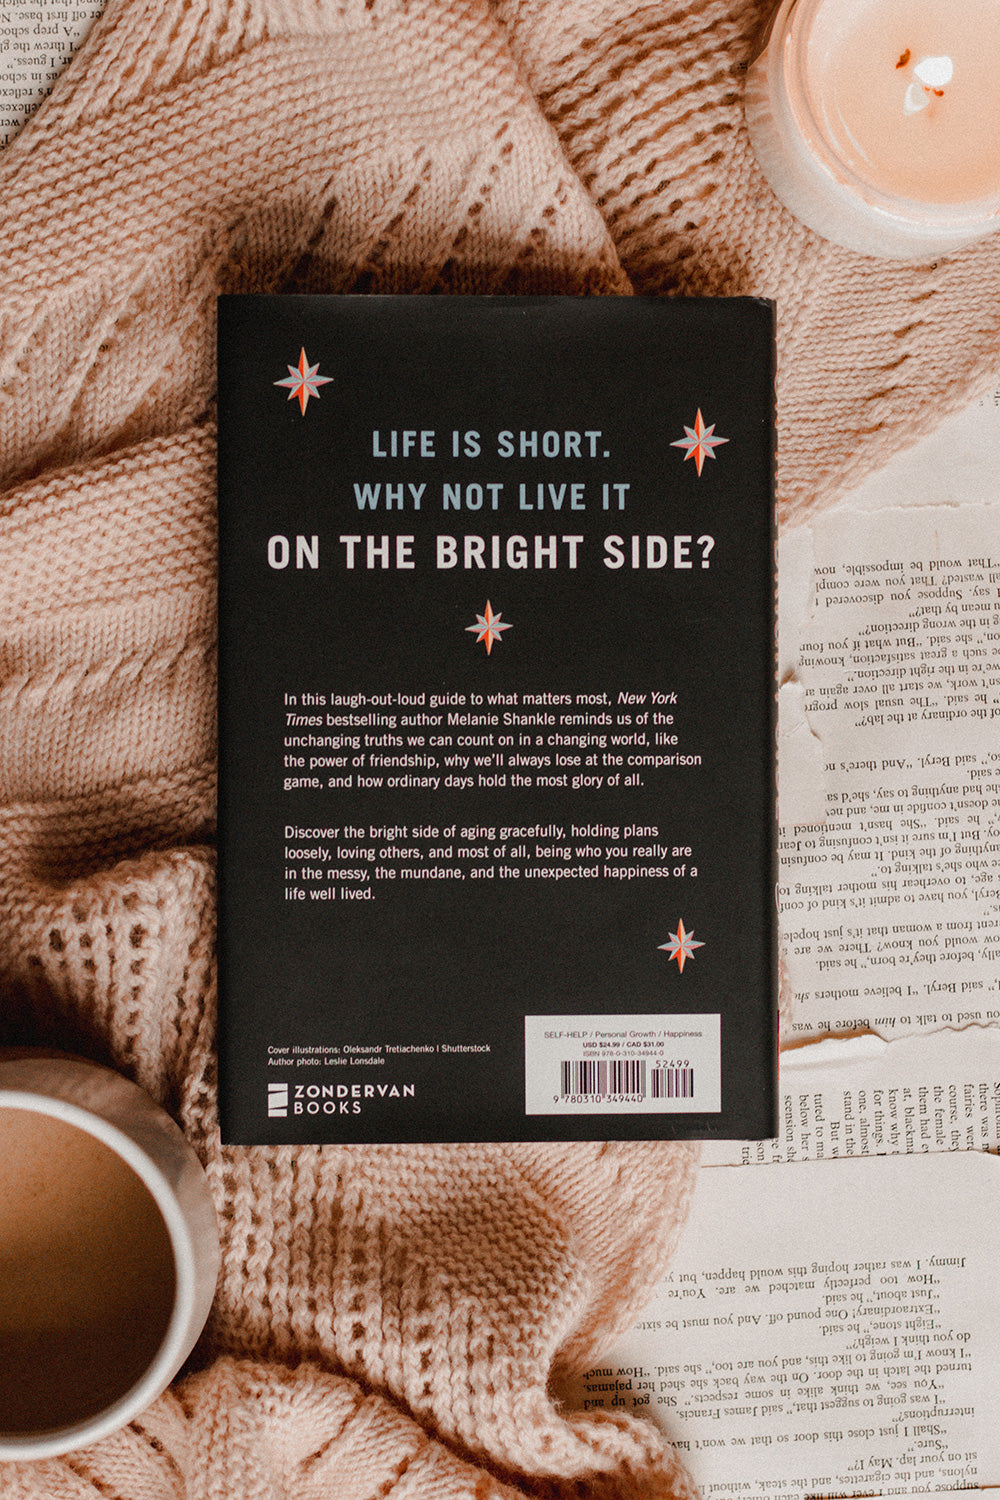 On the Bright Side by Melanie Shankle